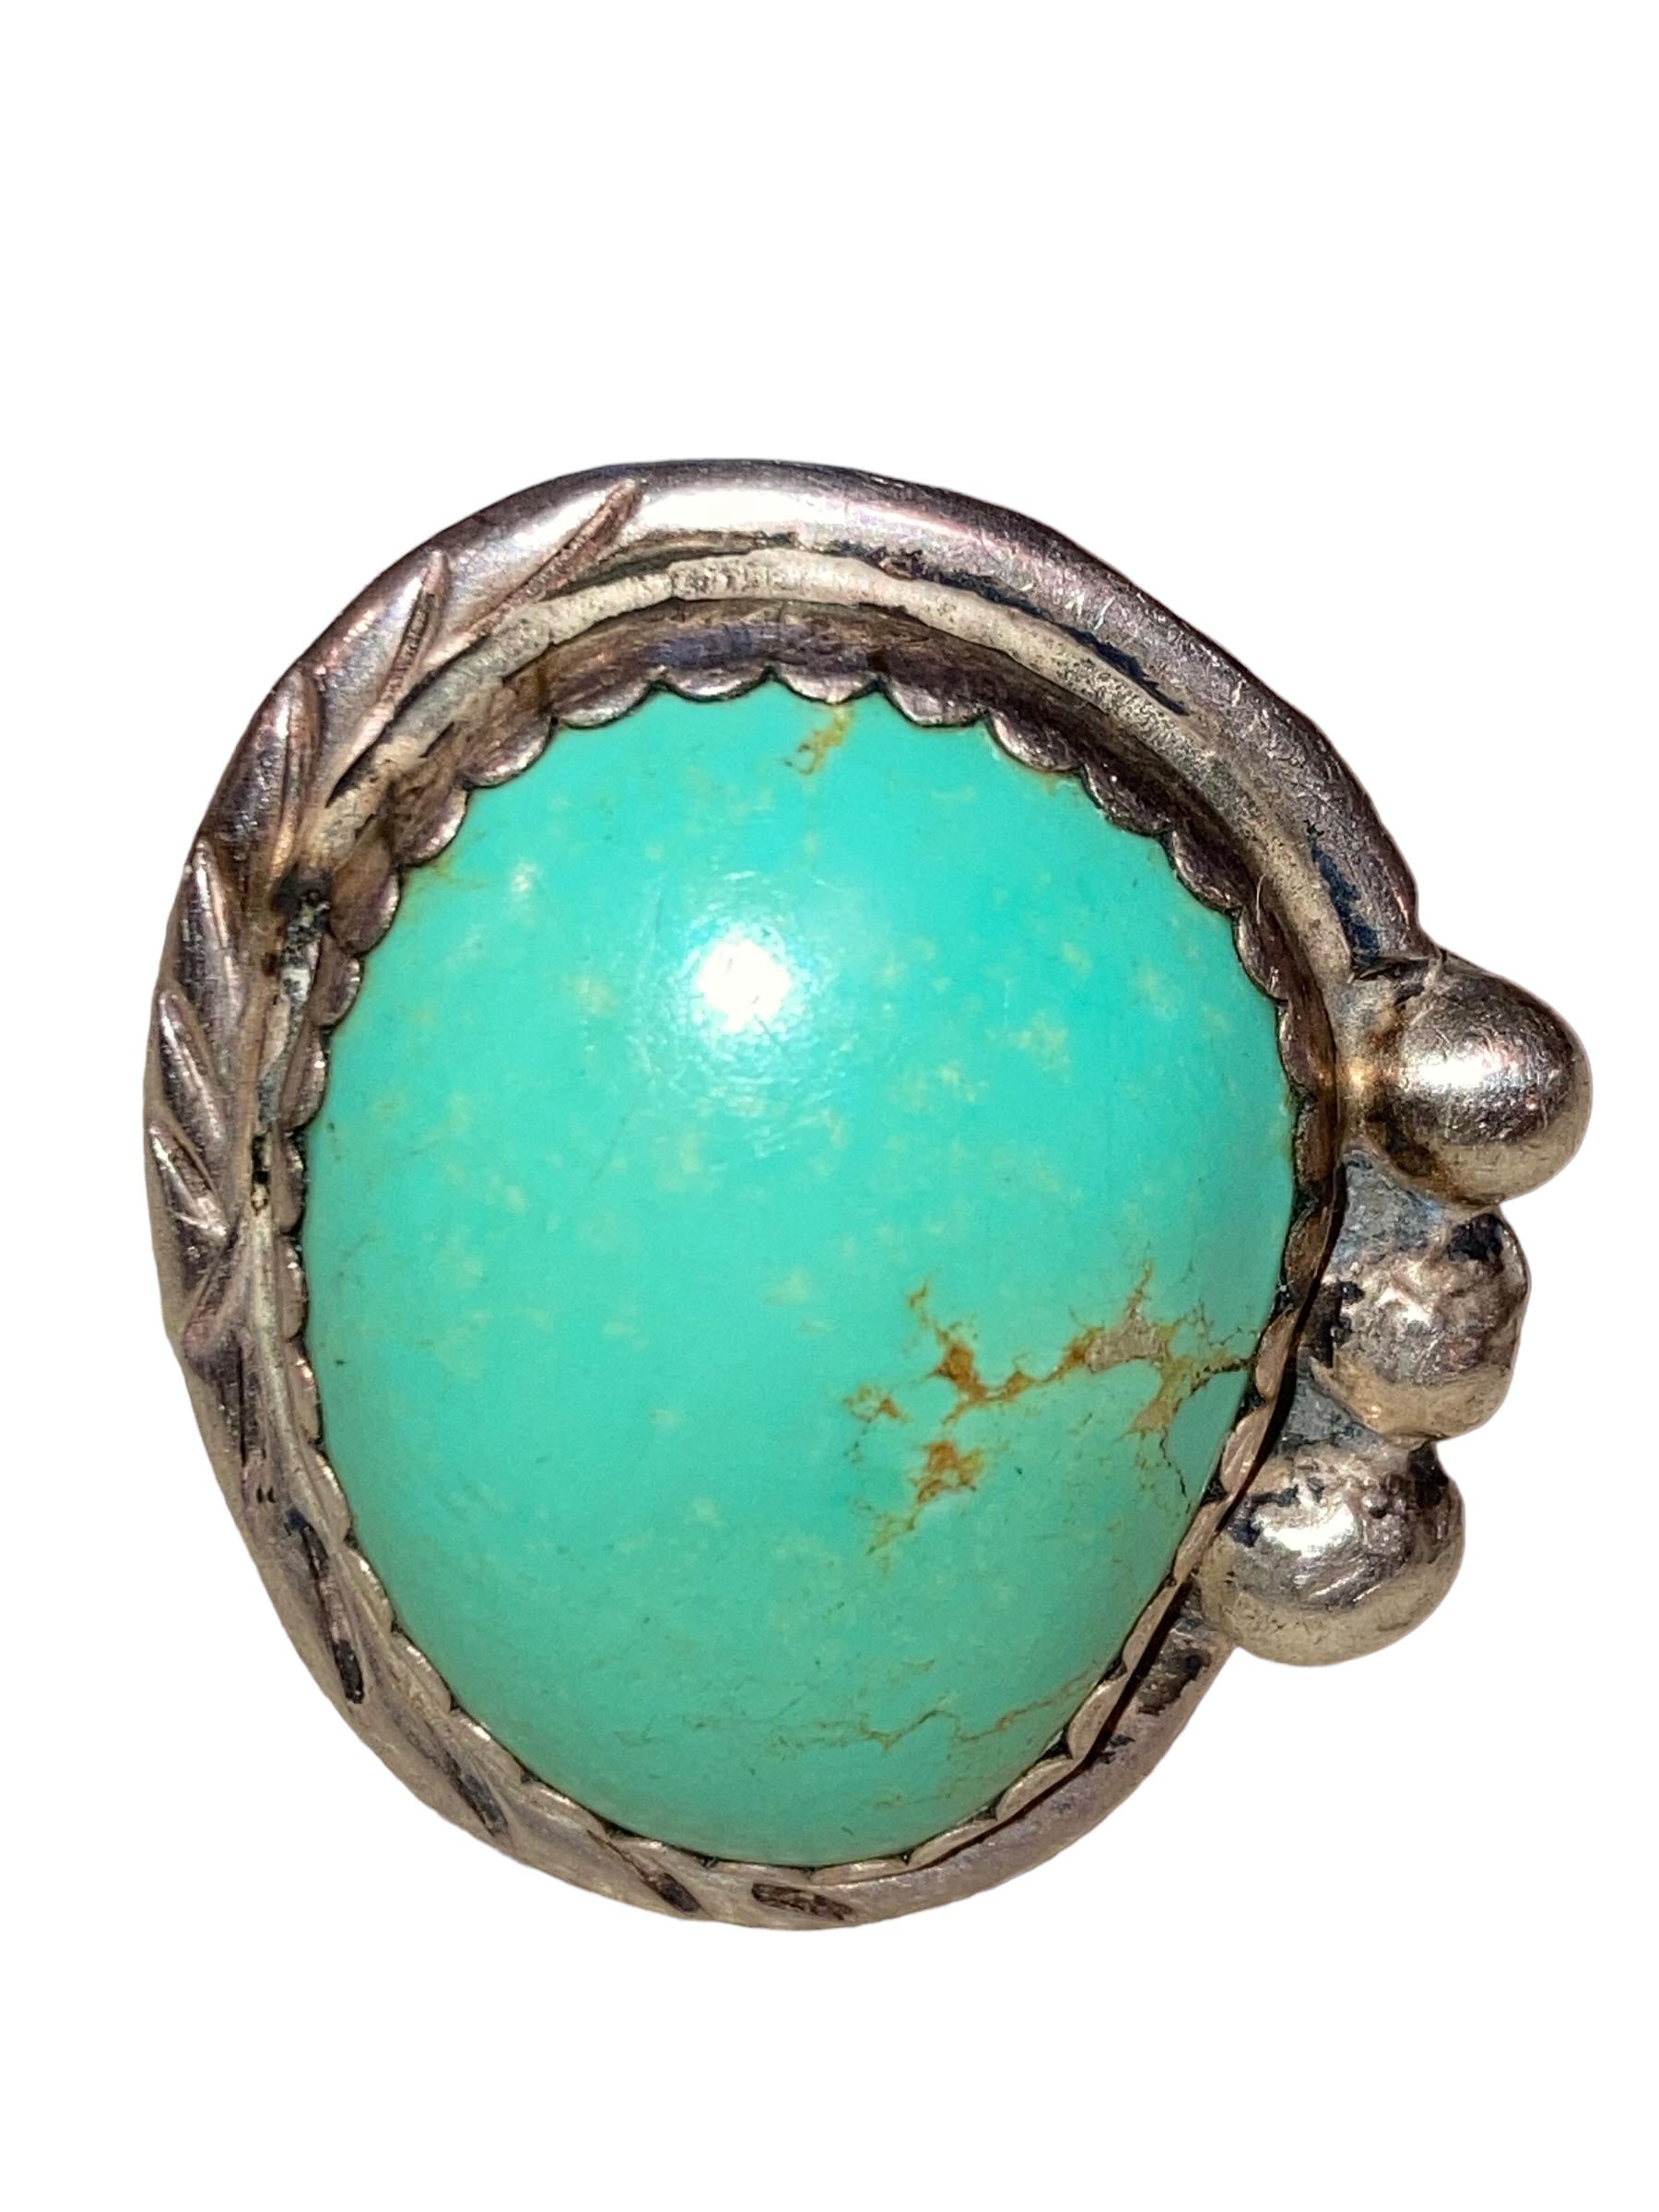 This Men's Native American Sterling Silver Bird's Eye Turquoise Navajo Ring was crafted by master silversmith Verdy Jake. She was born in 1953 and by the 1970s had become a well known and respected Navajo jeweler. She was one of 13 siblings, taught